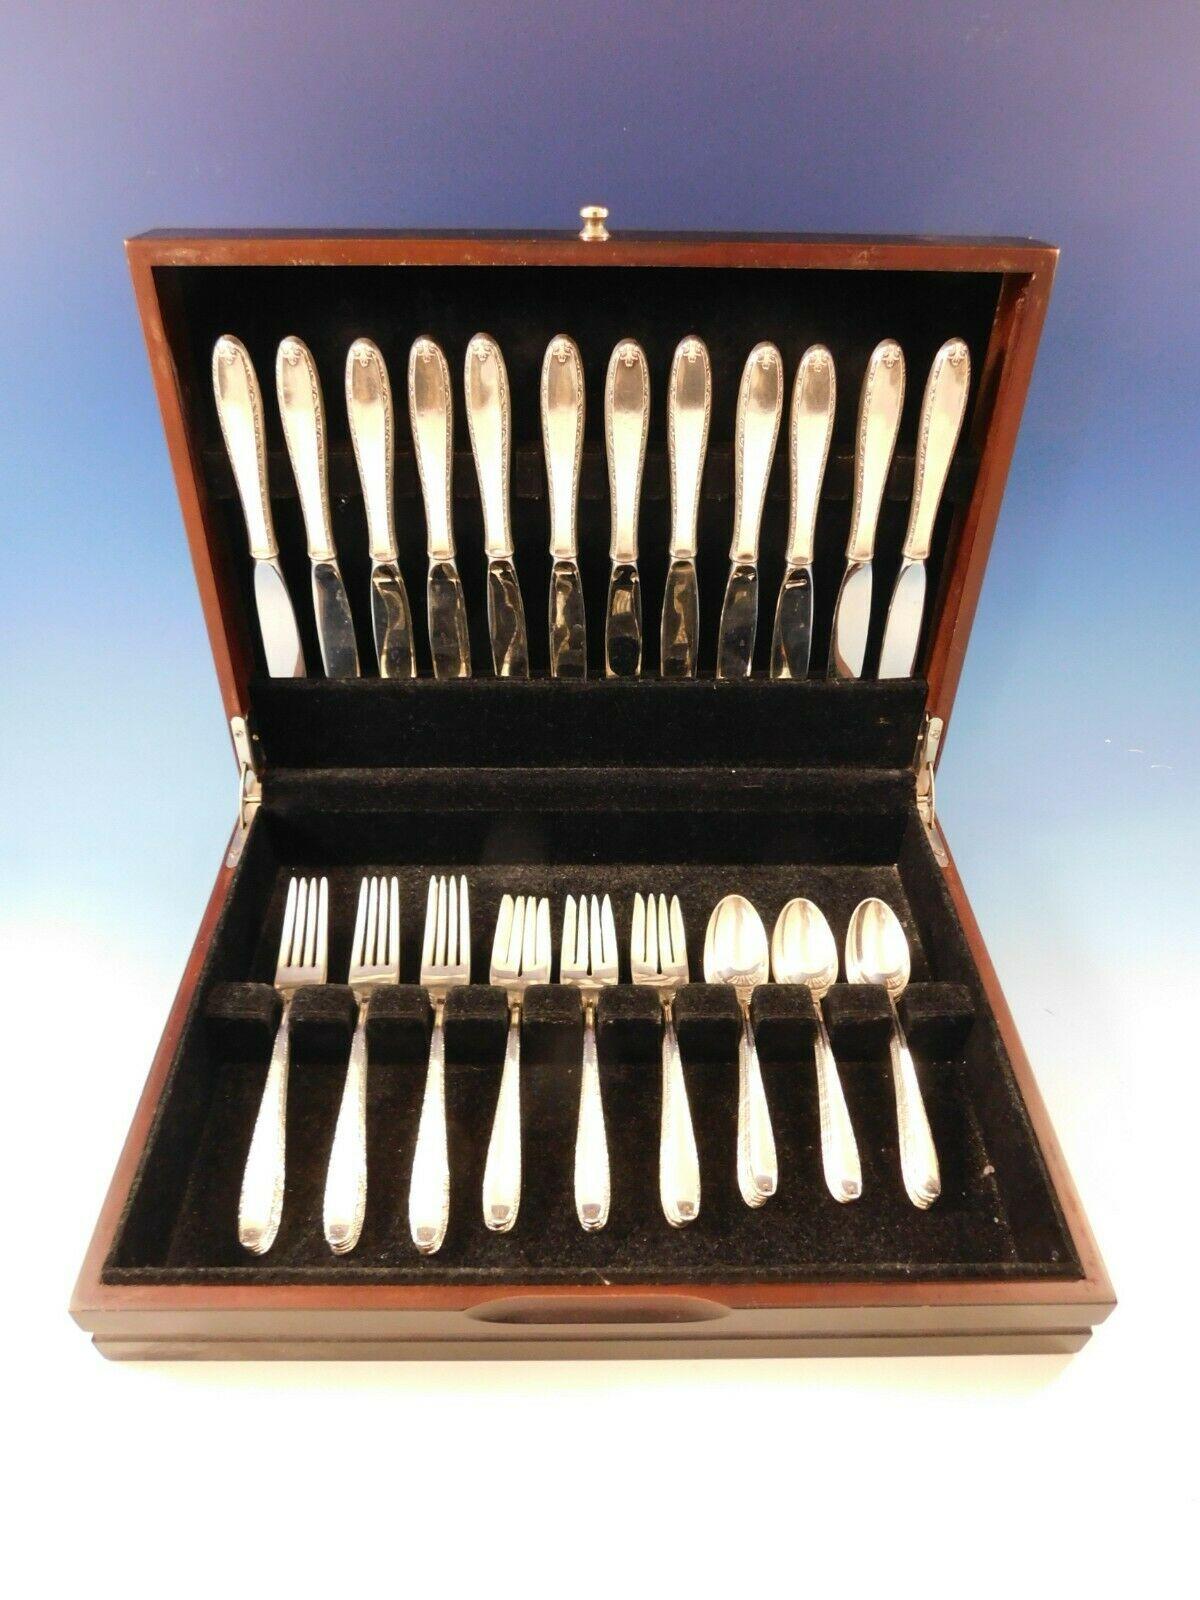 Southern Charm by Alvin sterling silver Flatware set, 48 pieces. This set includes:

 12 Knives, 9